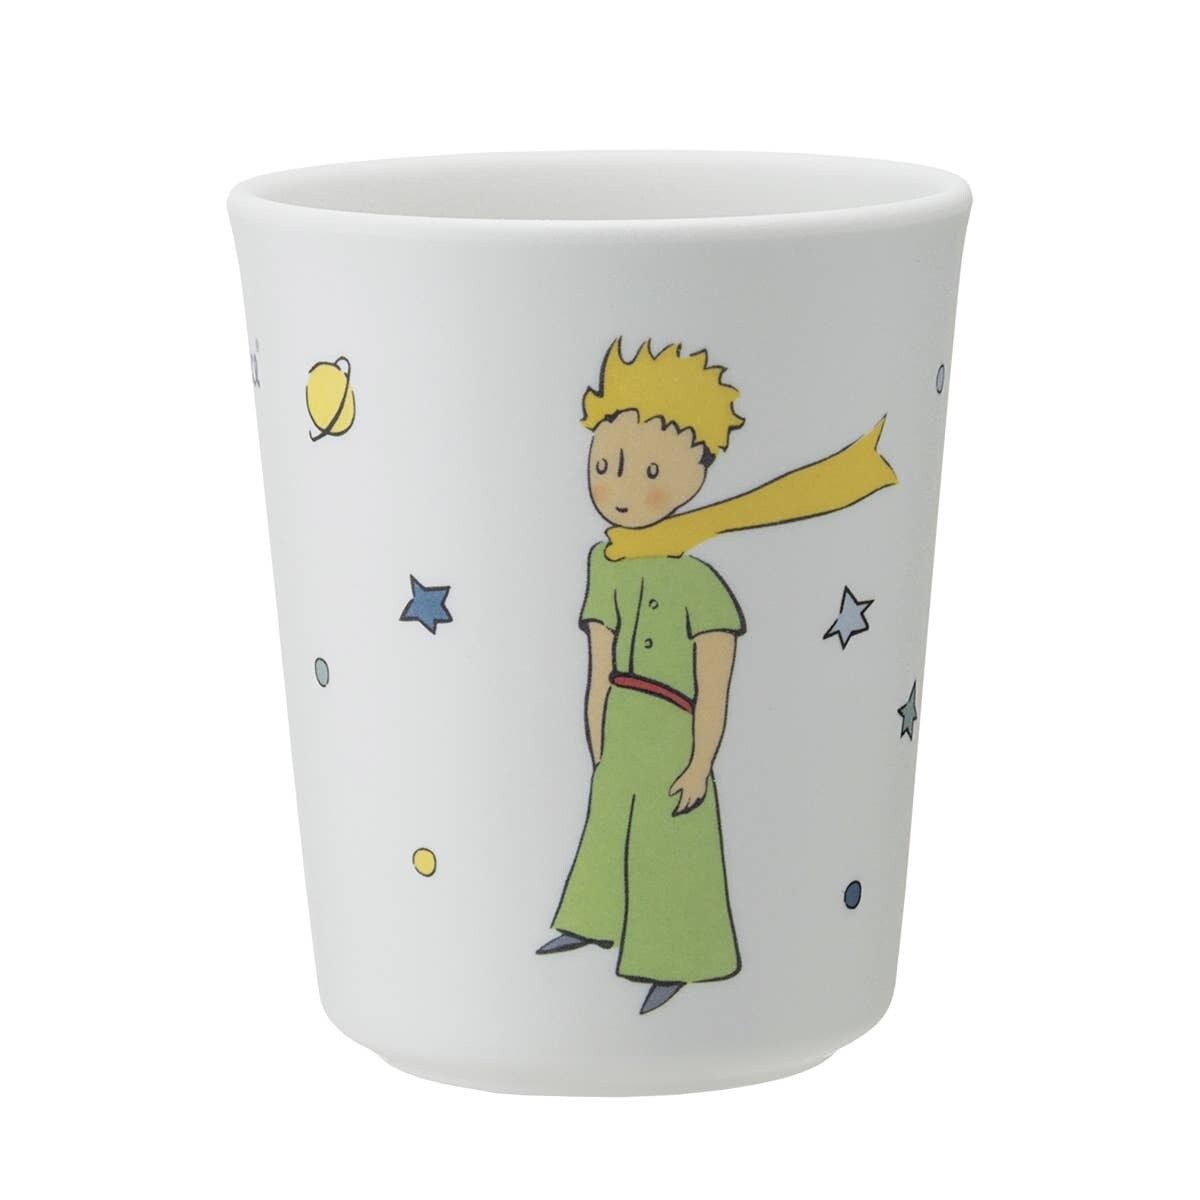 Drinking cup-The Little Prince